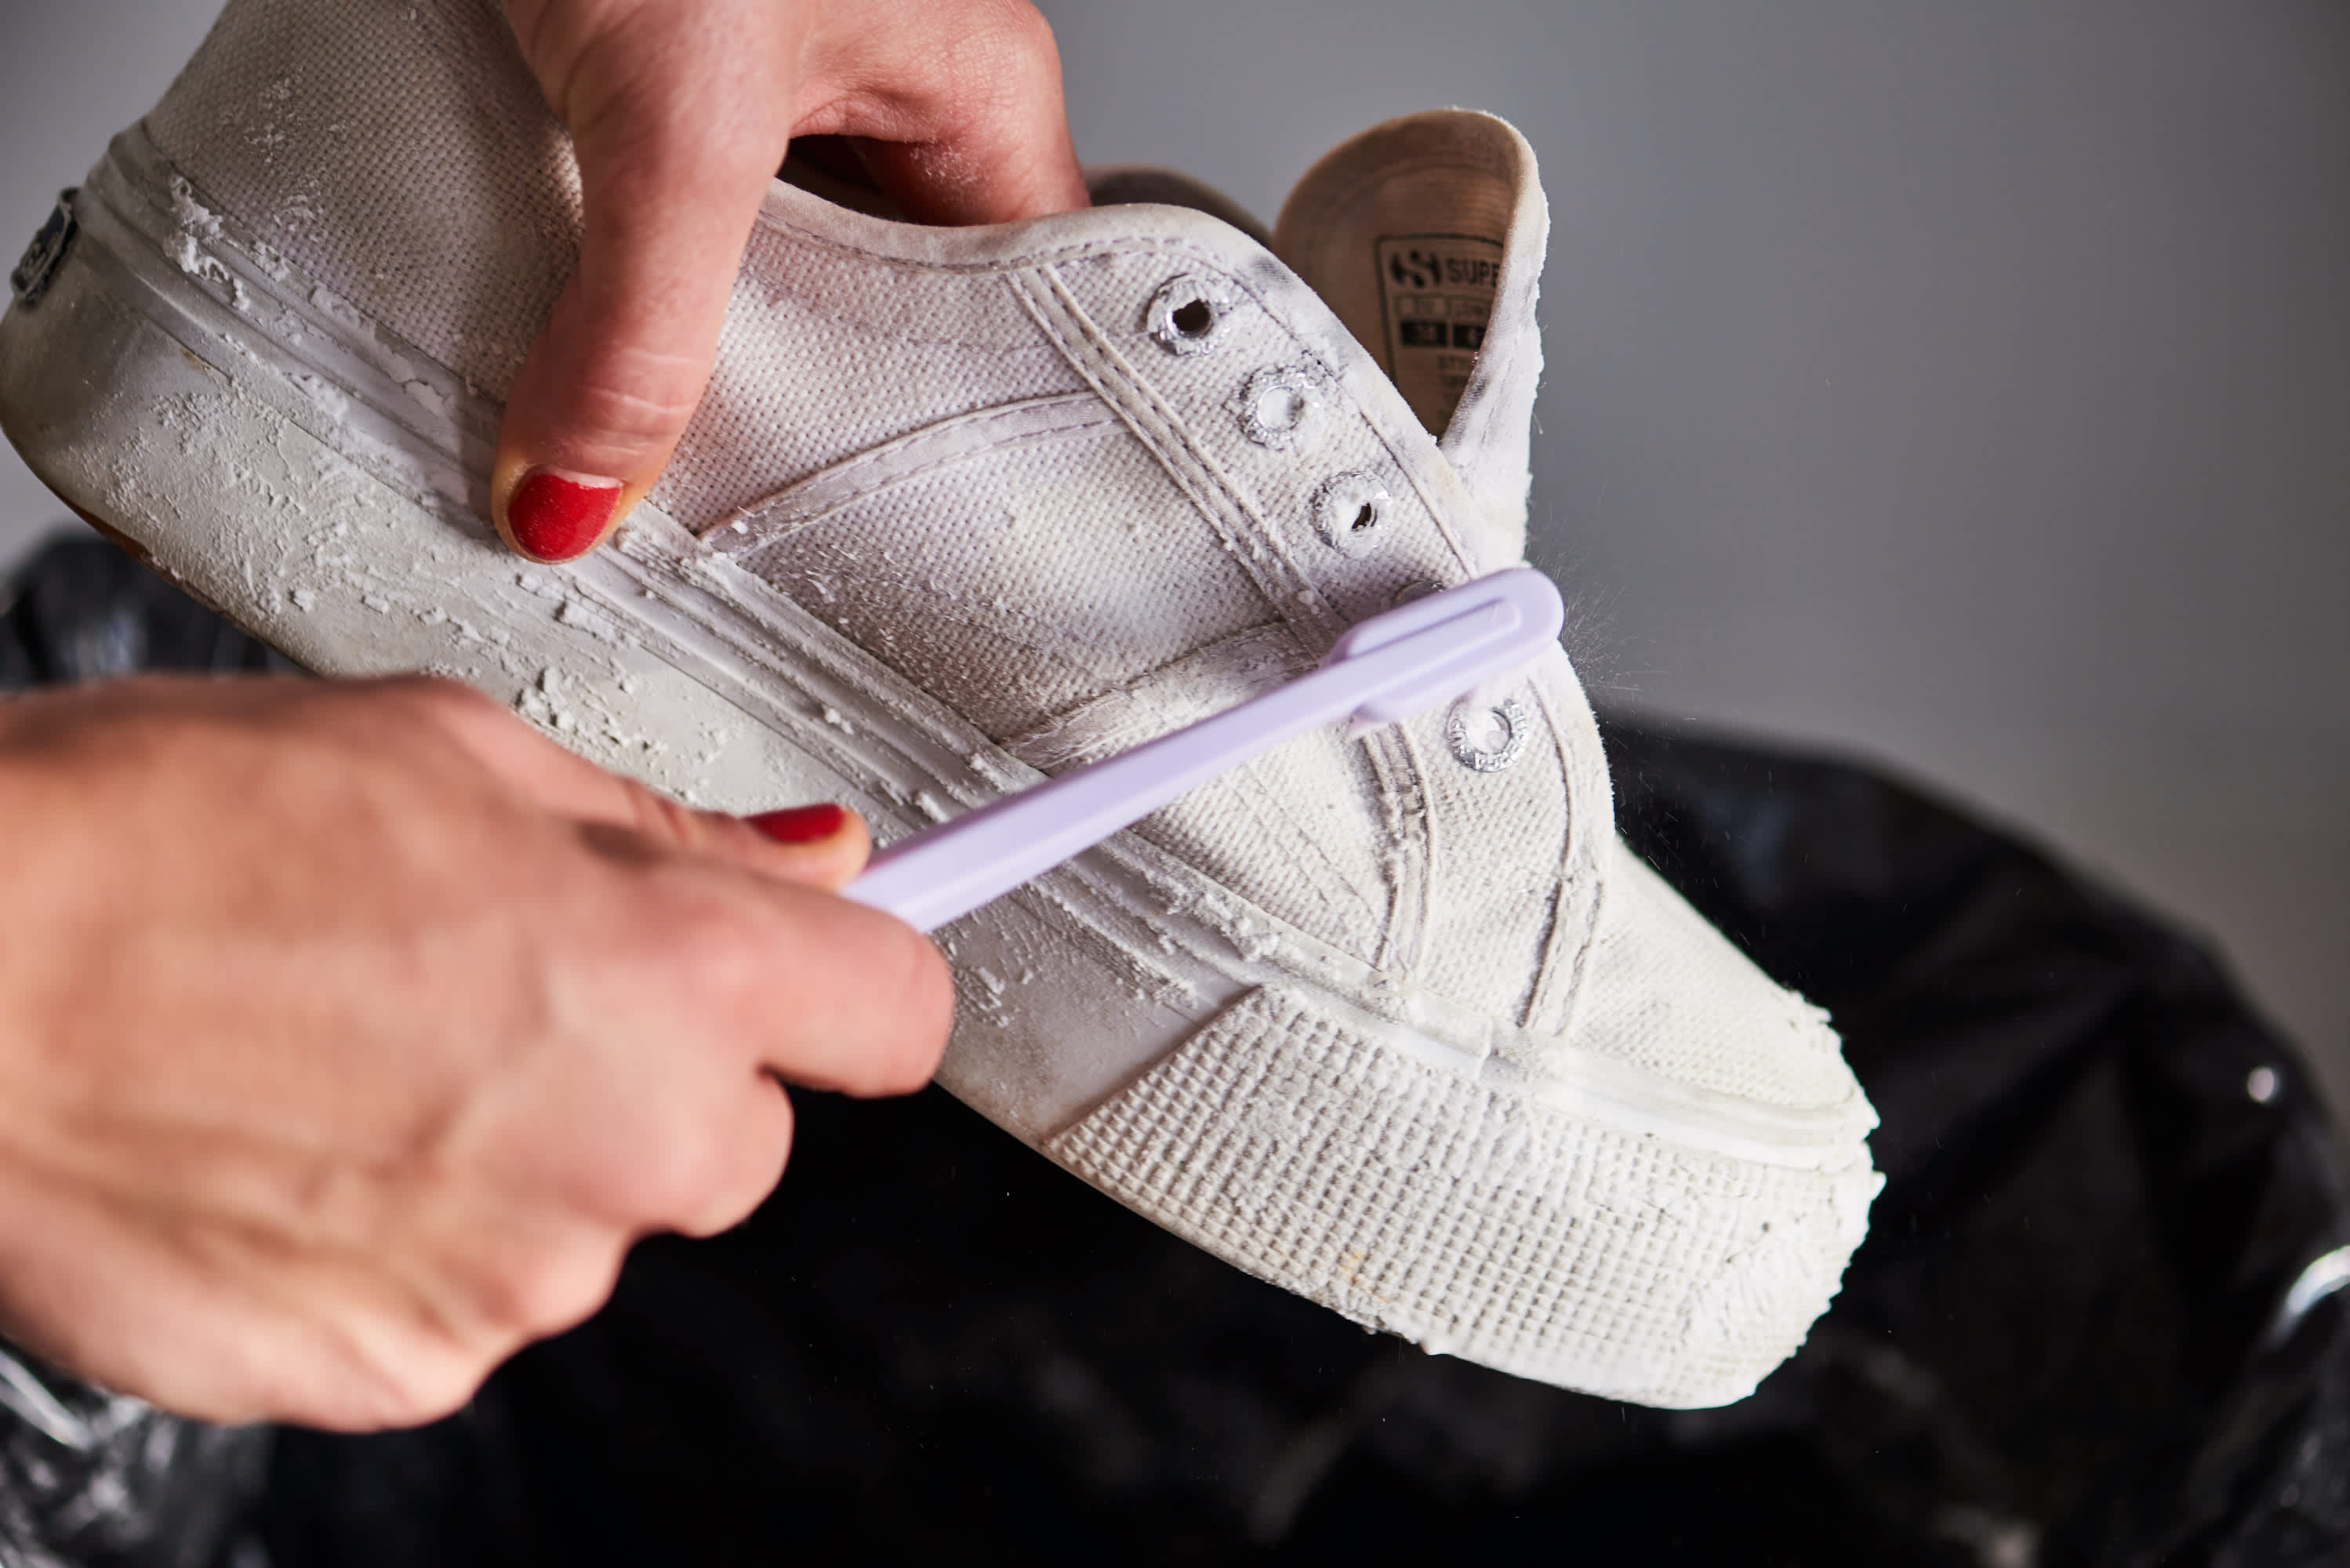 How to Clean White Shoes & Make Shoes White Again 7 Easy Ways